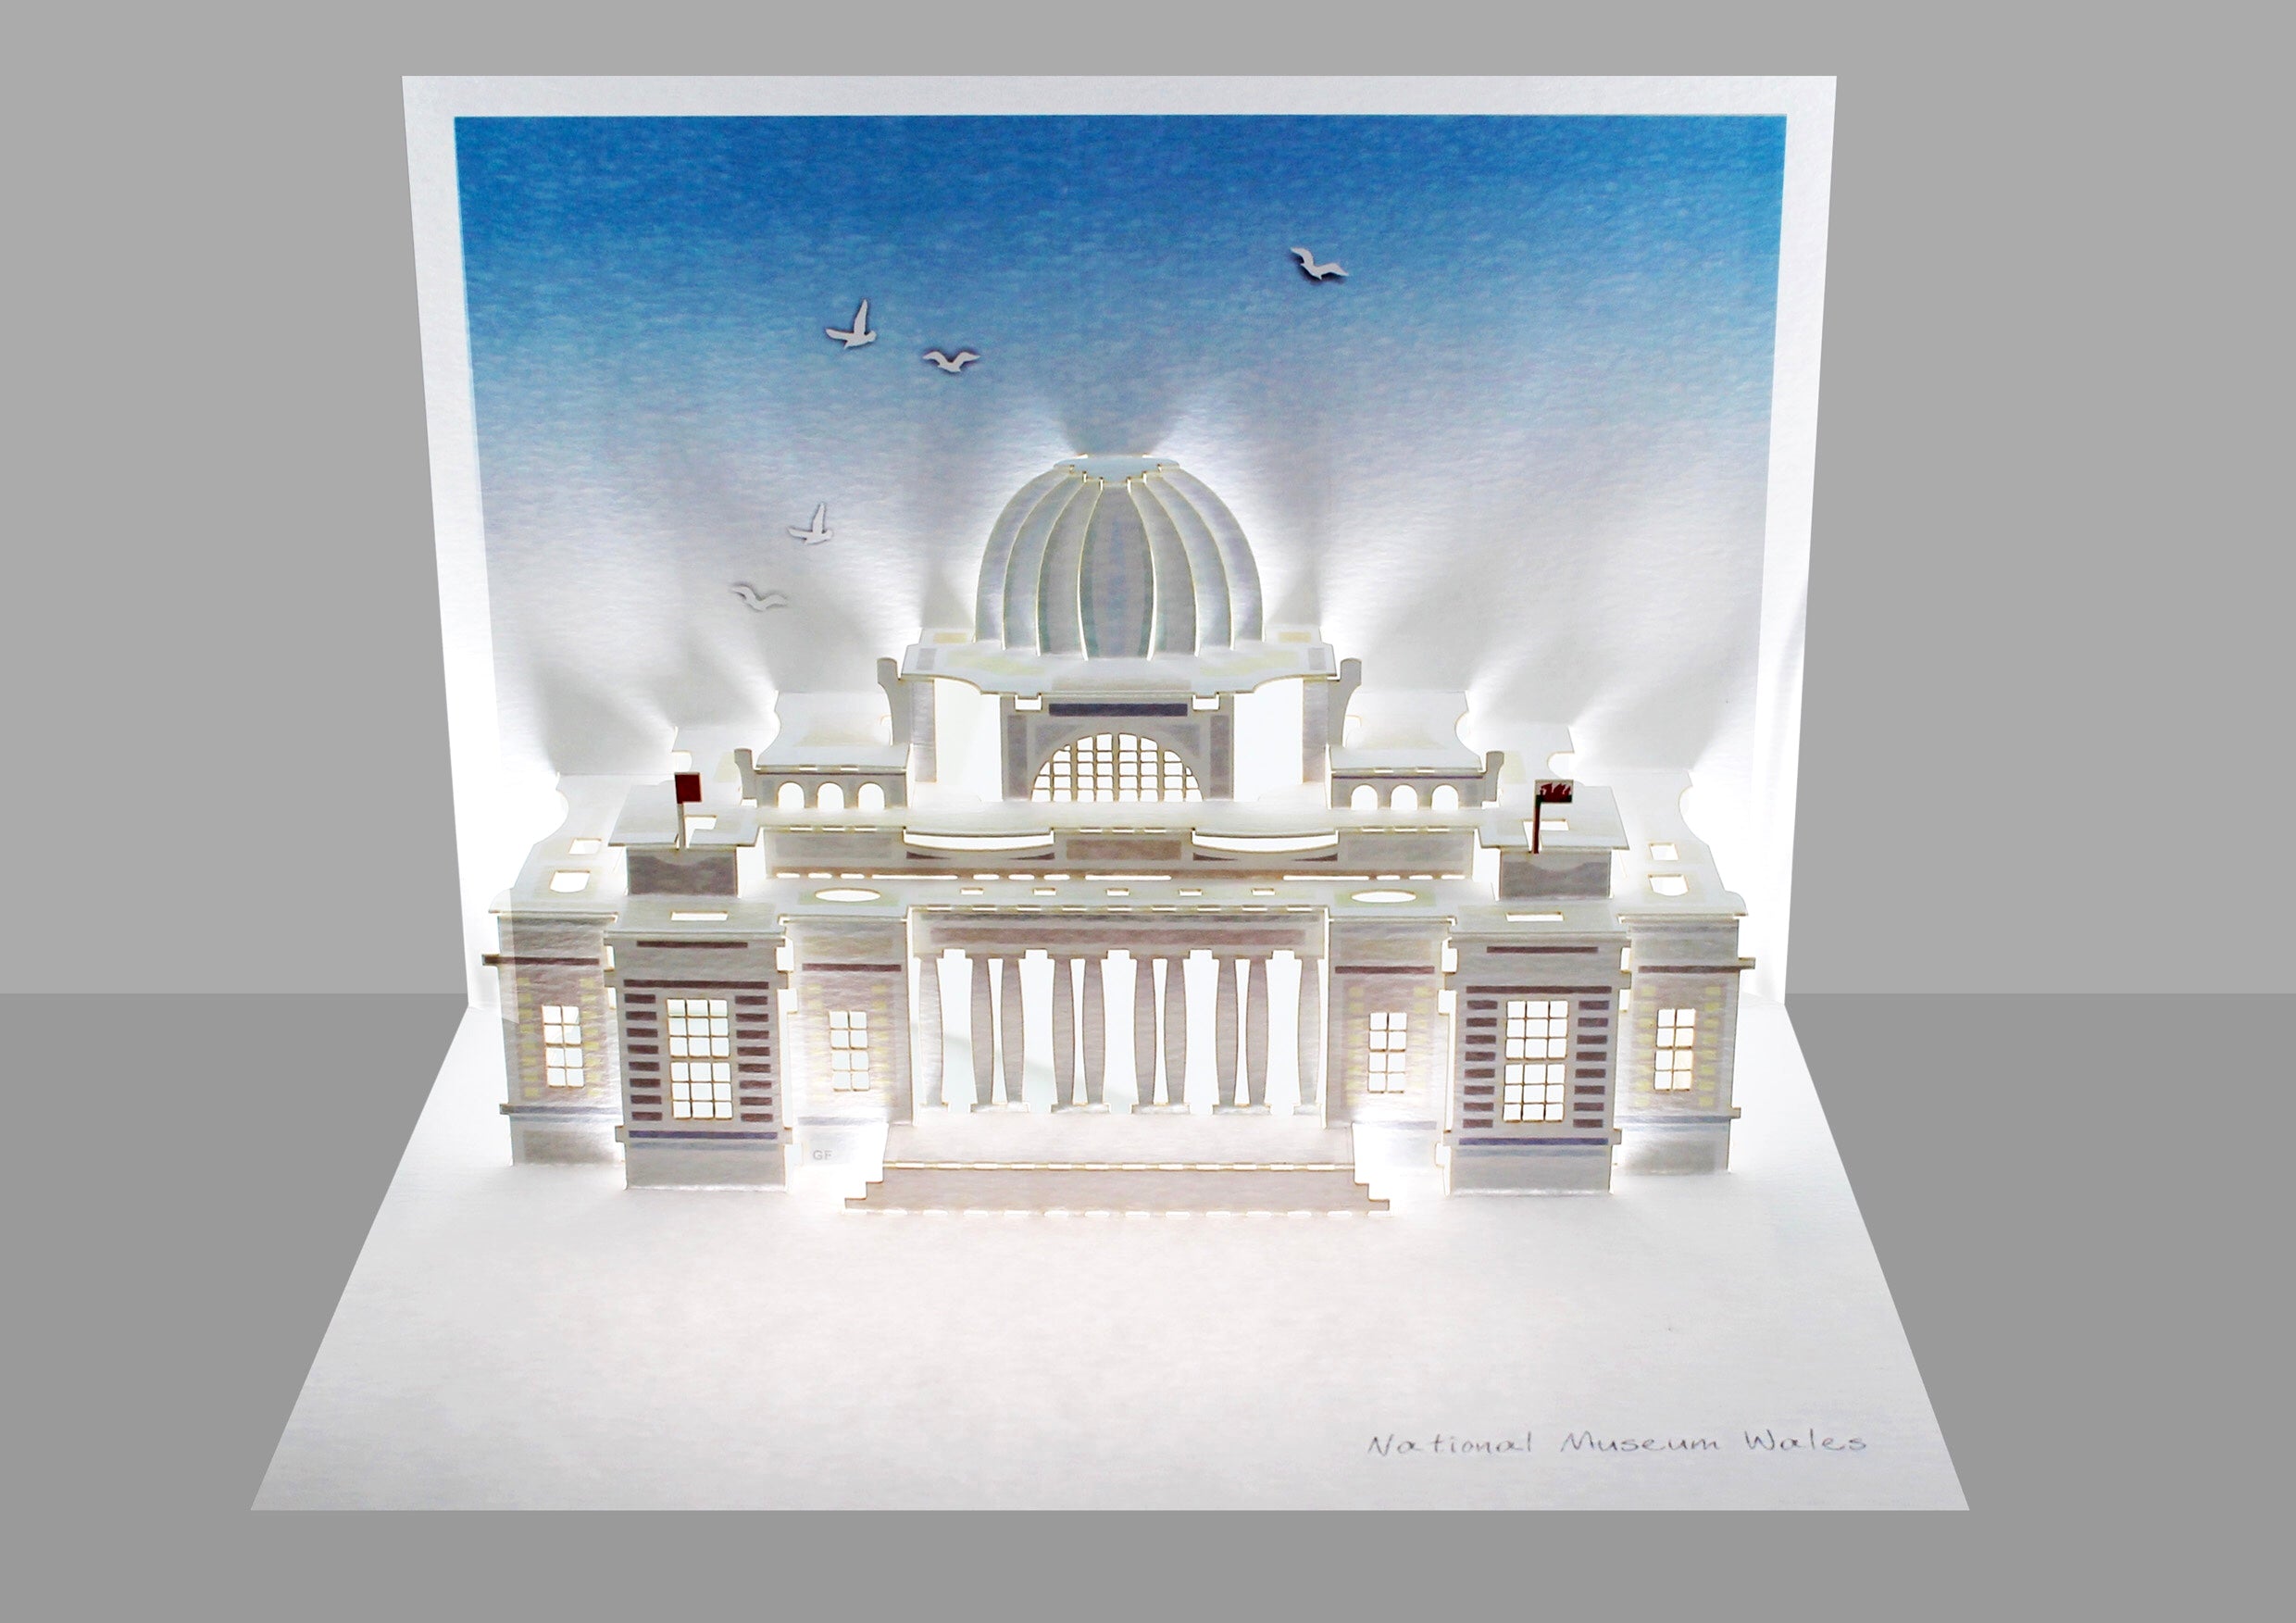 National Museum Of Wales Cardiff Iconic British Landmark 3D Pop Up Birthday Greeting Card